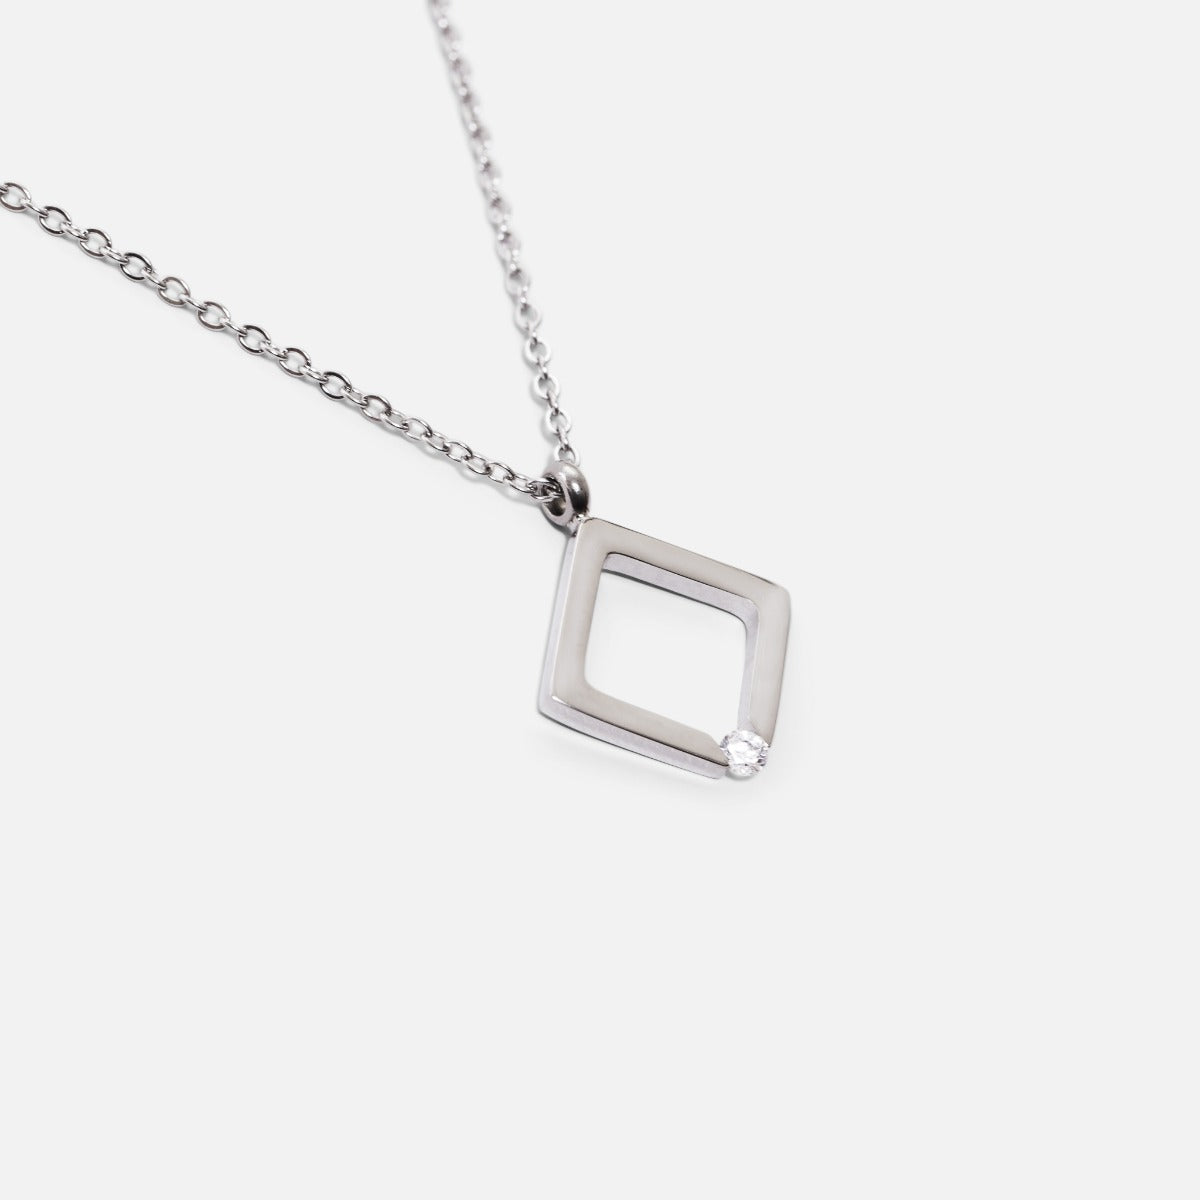 Stainless steel pendant with lozenge charm and cubic zirconia